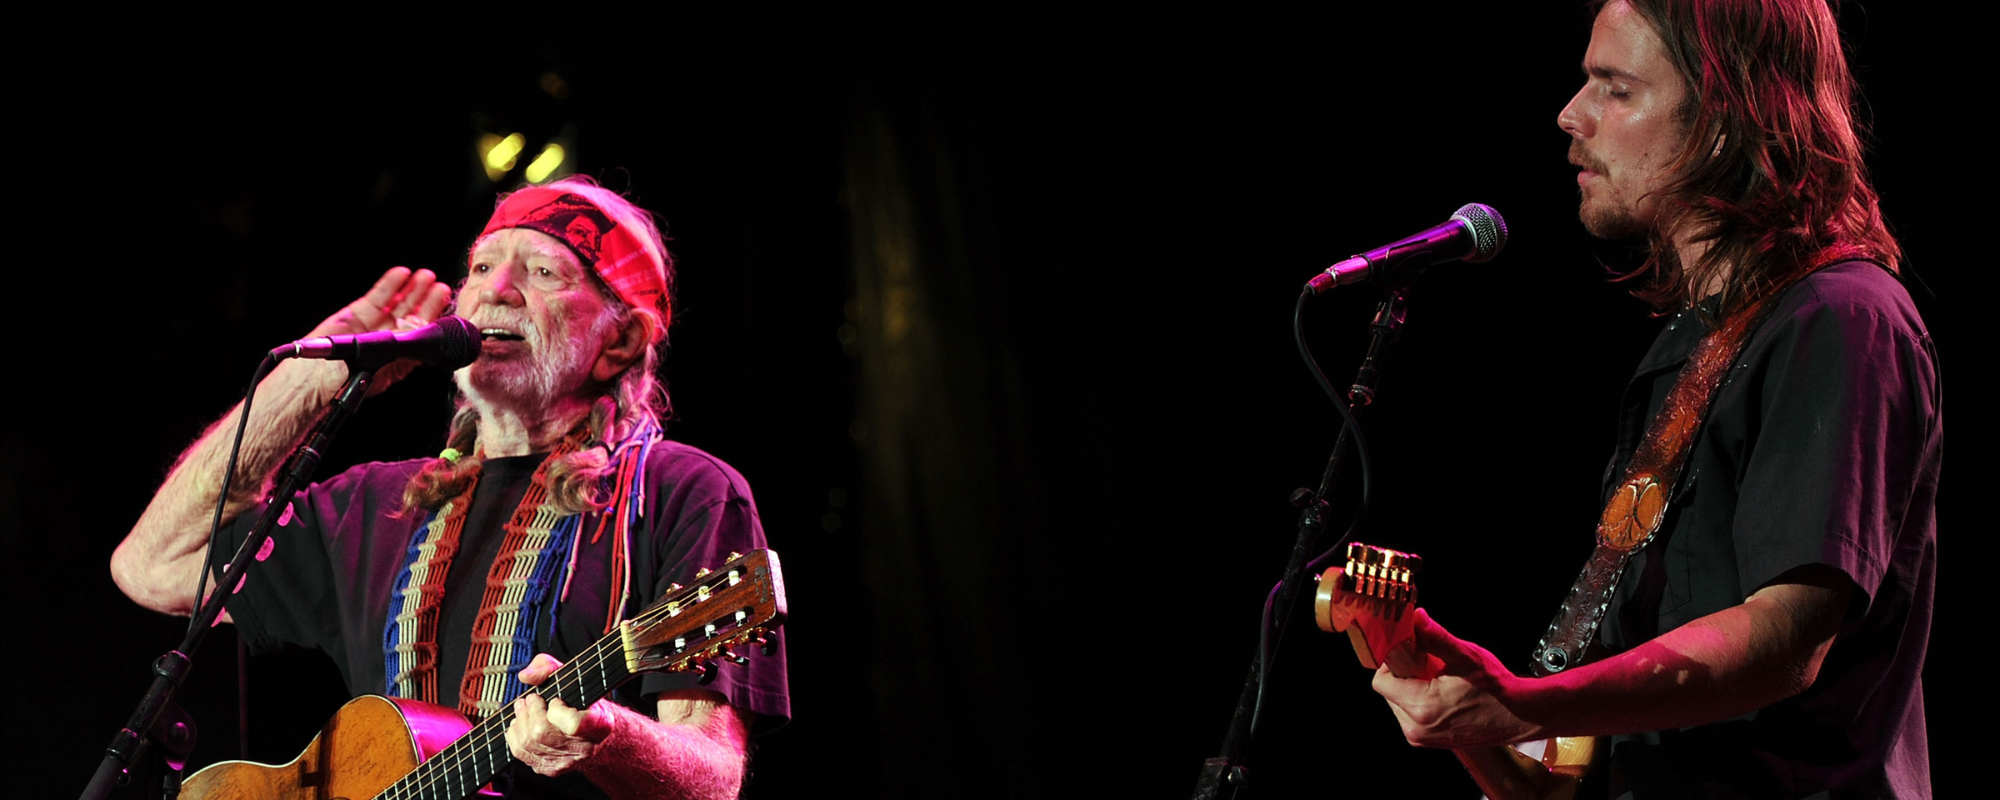 We Asked AI to Write a Duet in the Styles of Willie and Lukas Nelson